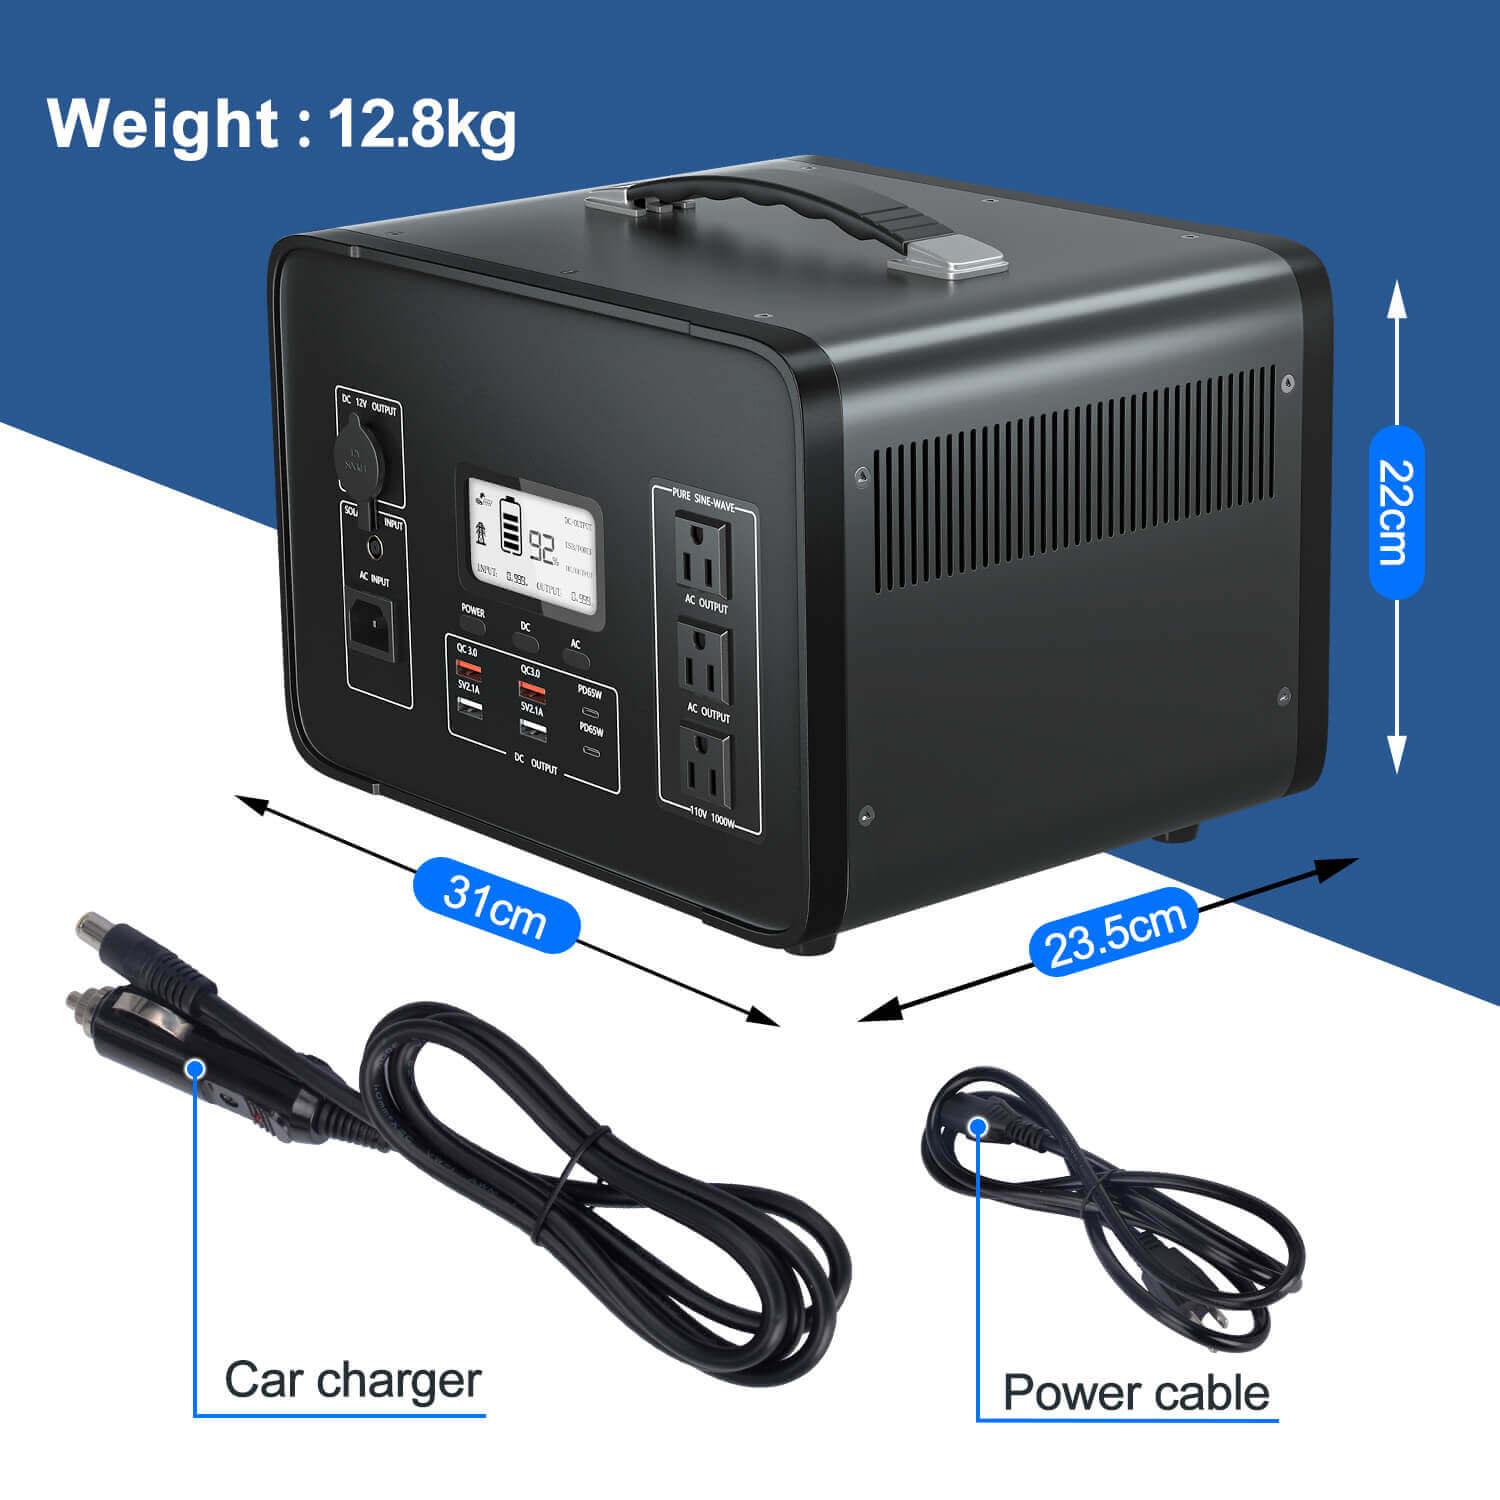 Cost-effective and Most worthwhile Portable Power Station Electric Battery Outdoor Generator For Power Outage Supplies 1000W 315000mAh - XGODY 